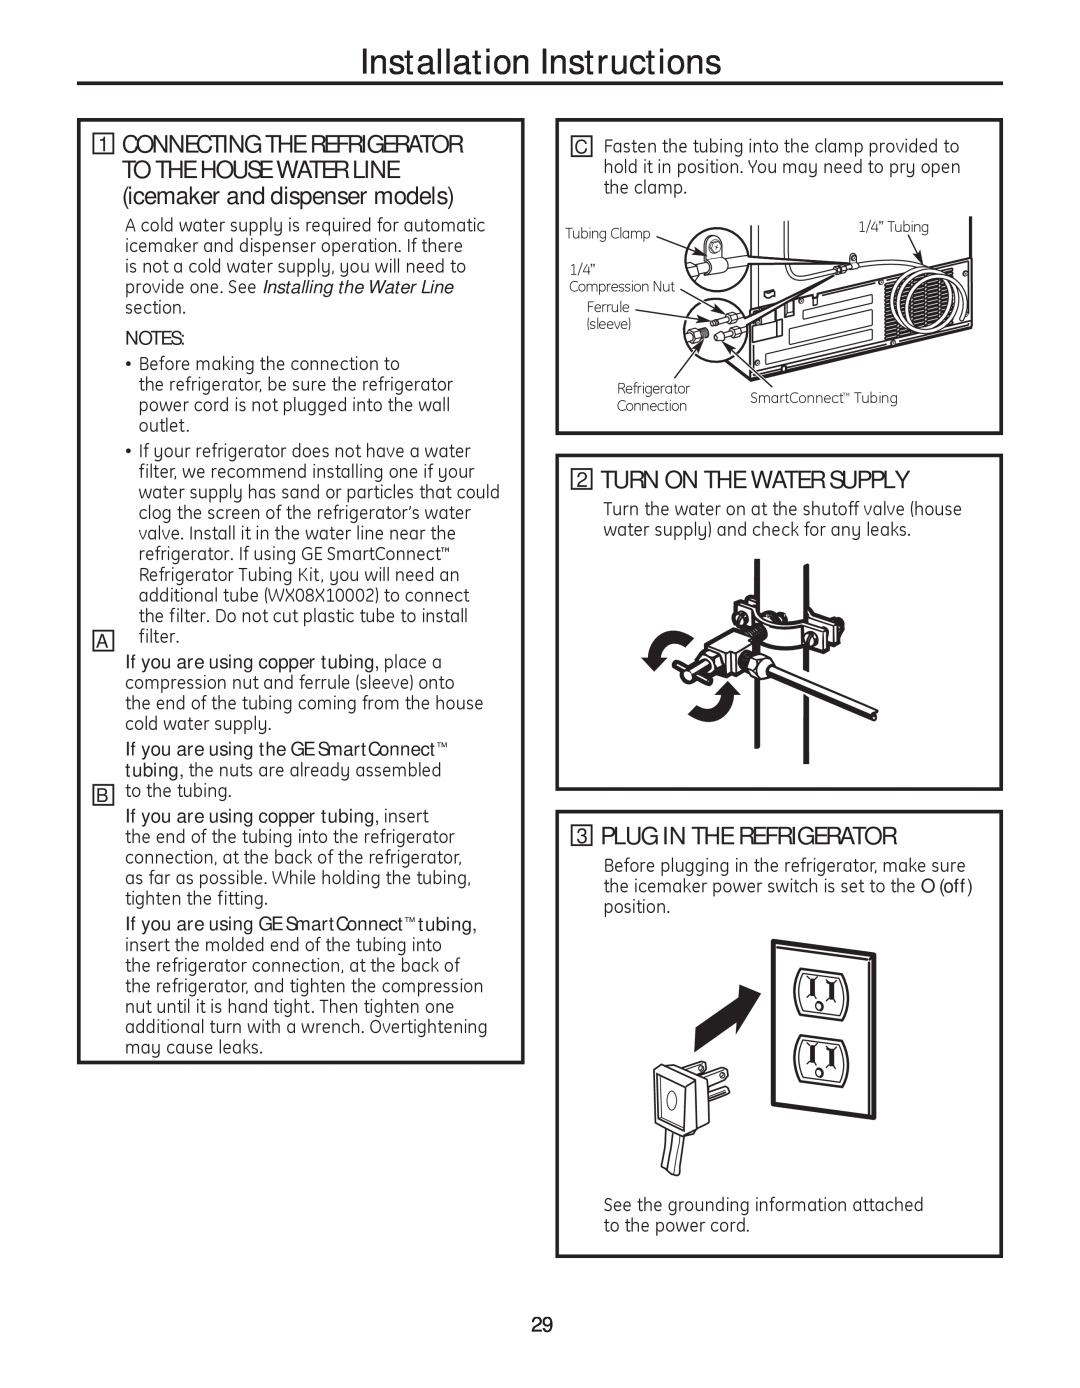 GE 200D8074P050 installation instructions Turn On The Water Supply, Plug In The Refrigerator, Installation Instructions 